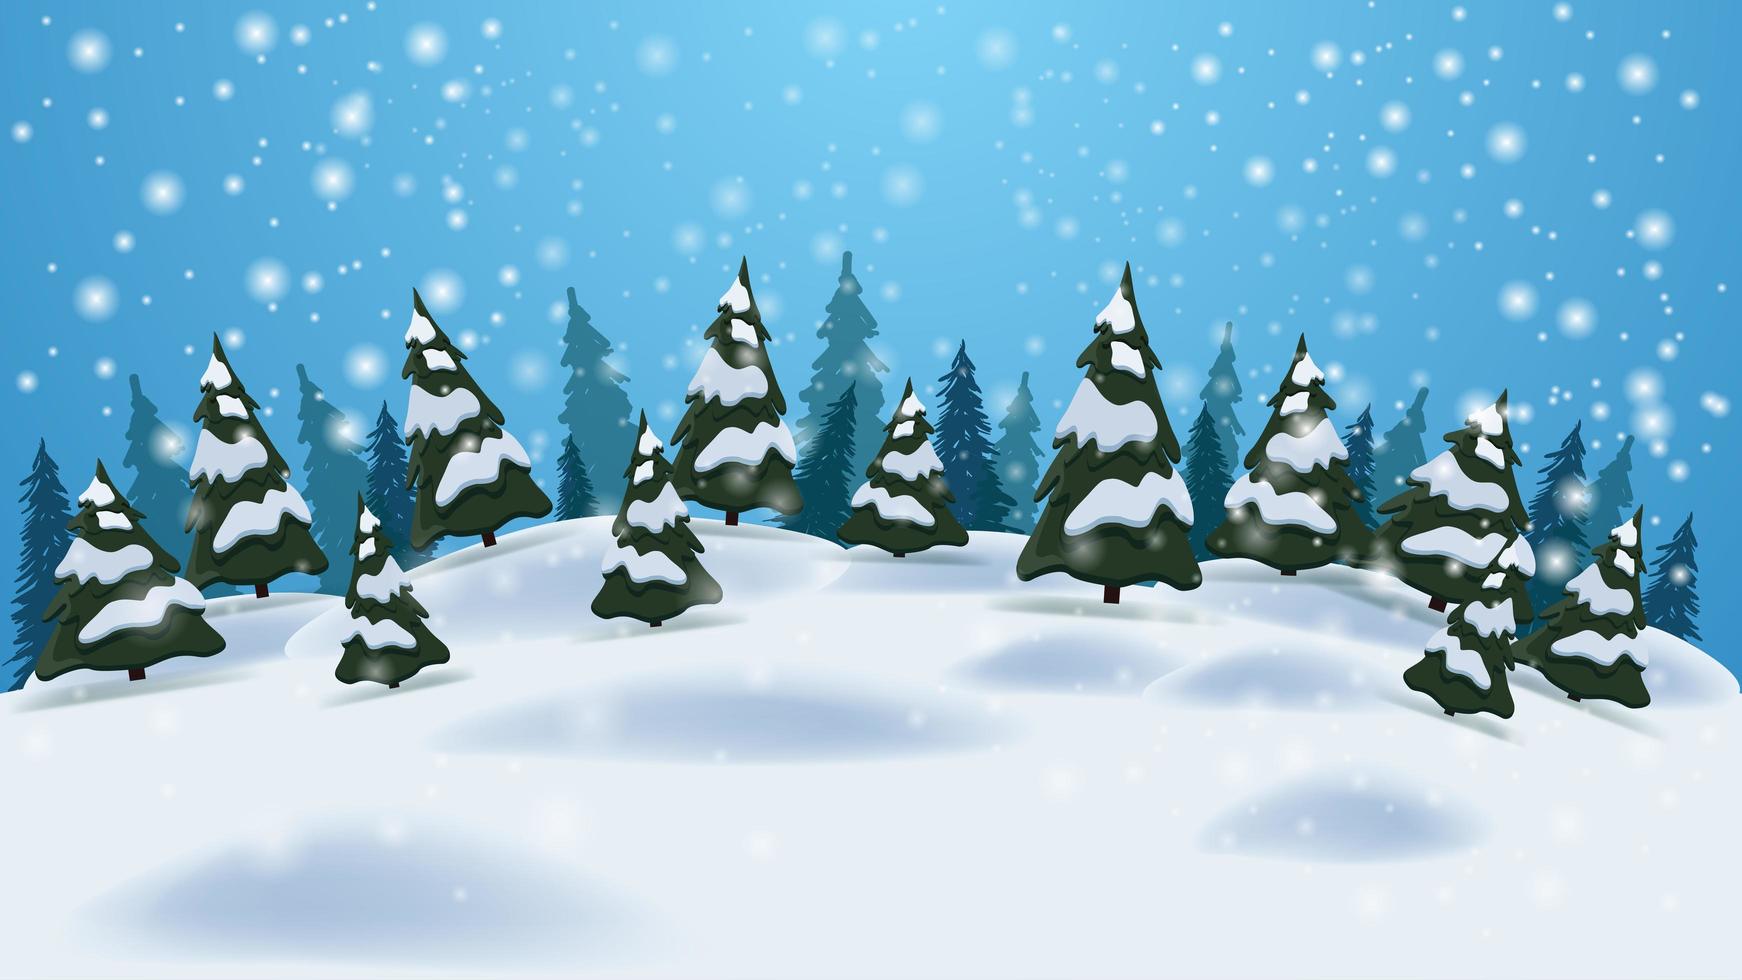 Winter cartoon landscape with blue sky, pines, drifts and snowfall. Background for your arts. vector